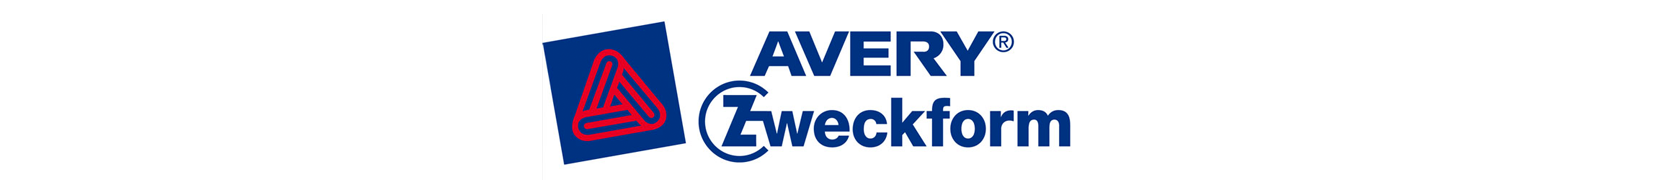 Avery Zweckform.png